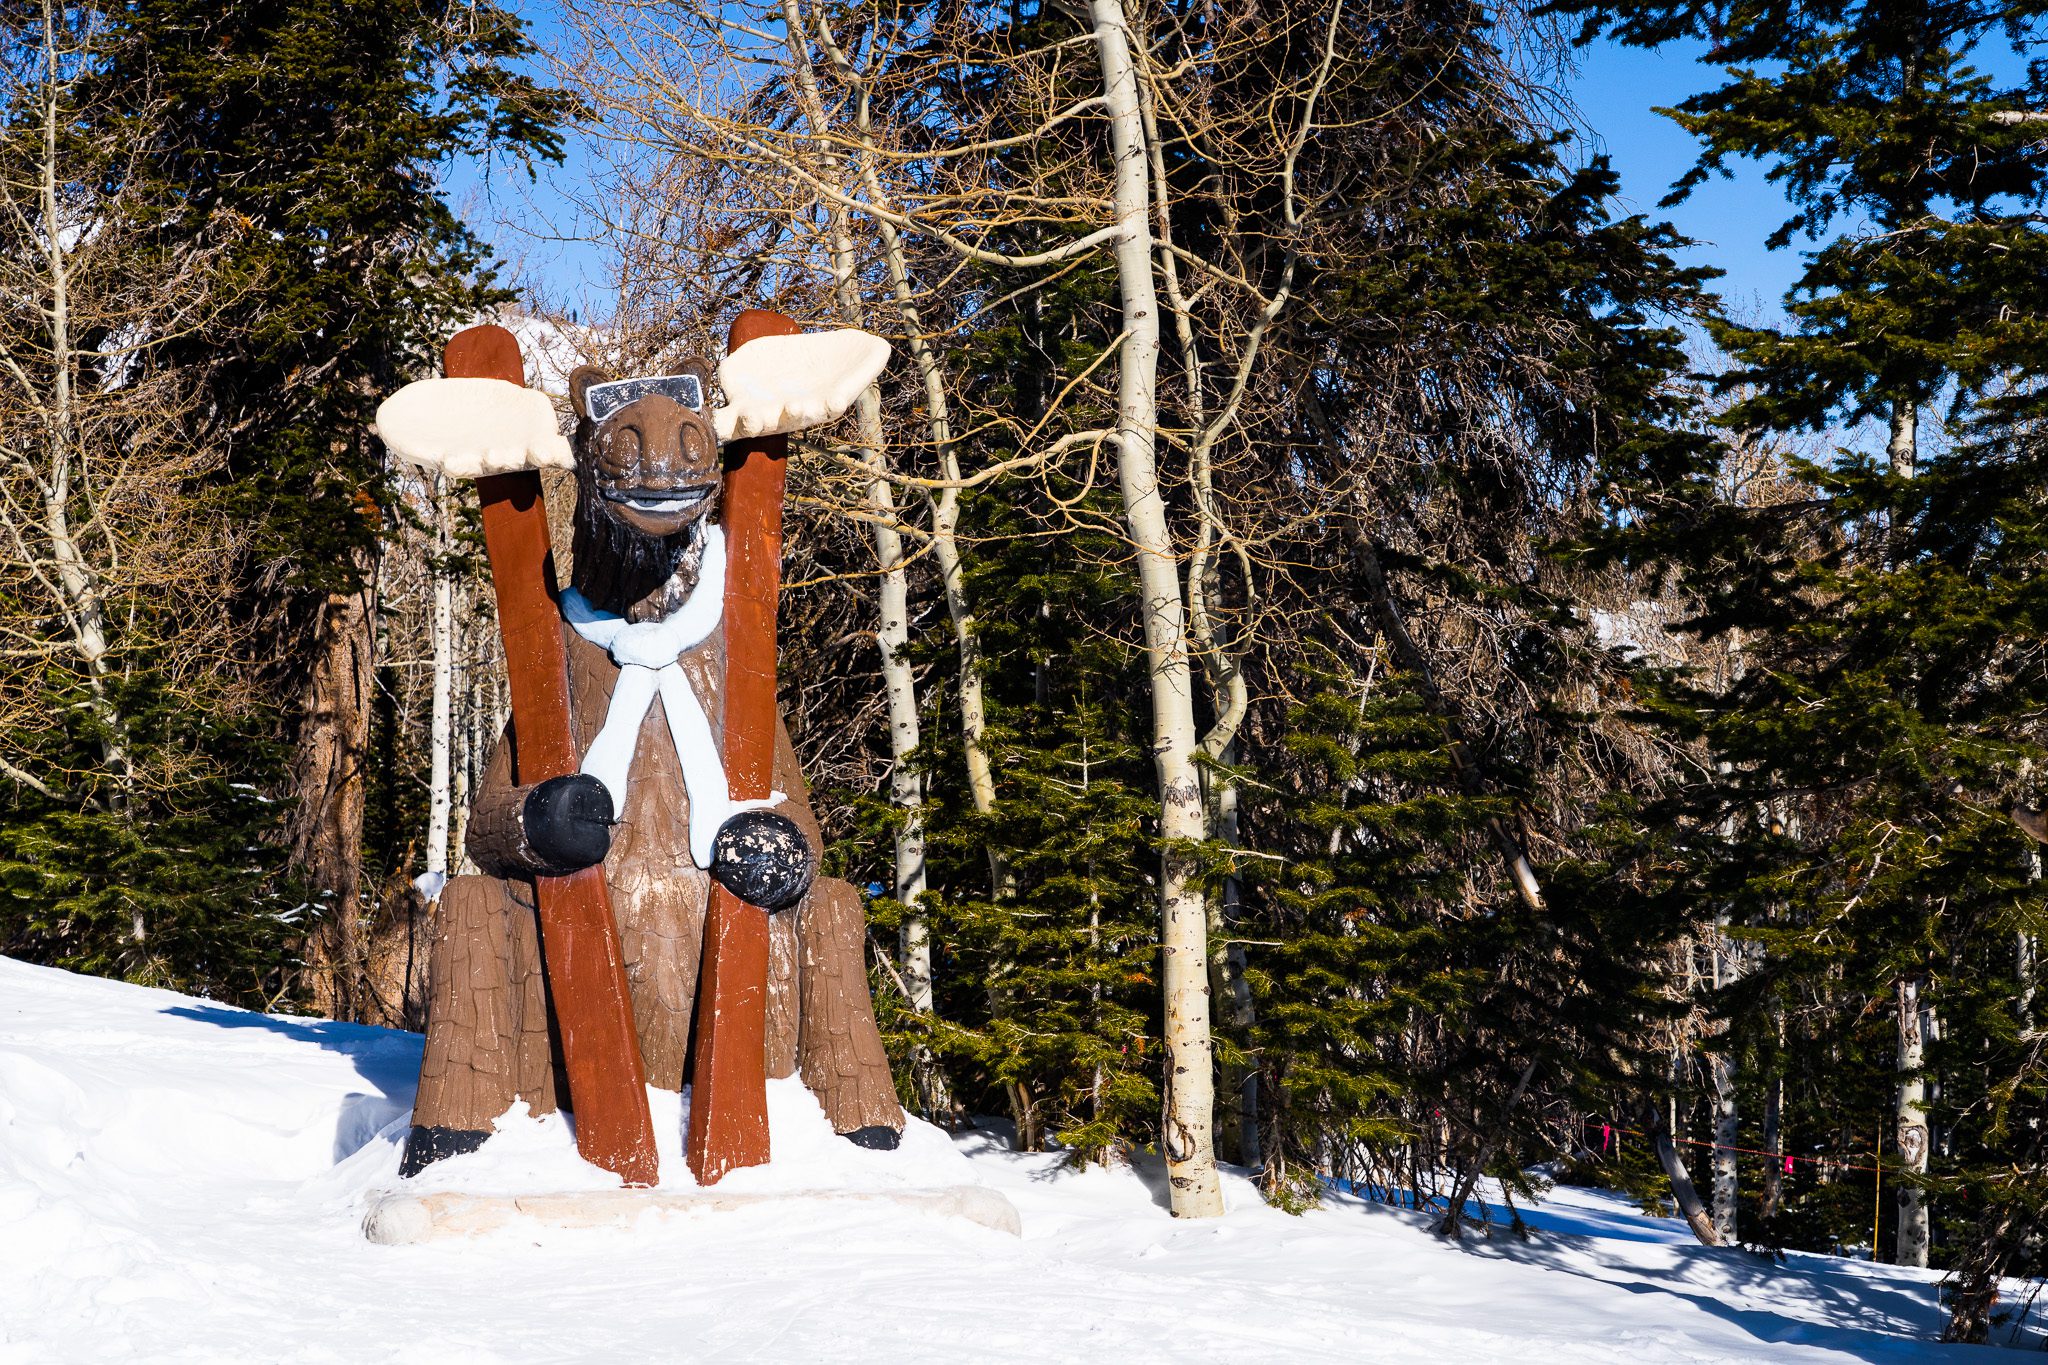 Skiing moose, just one surprise to be found at High Mountain Park at Park City Mountain.